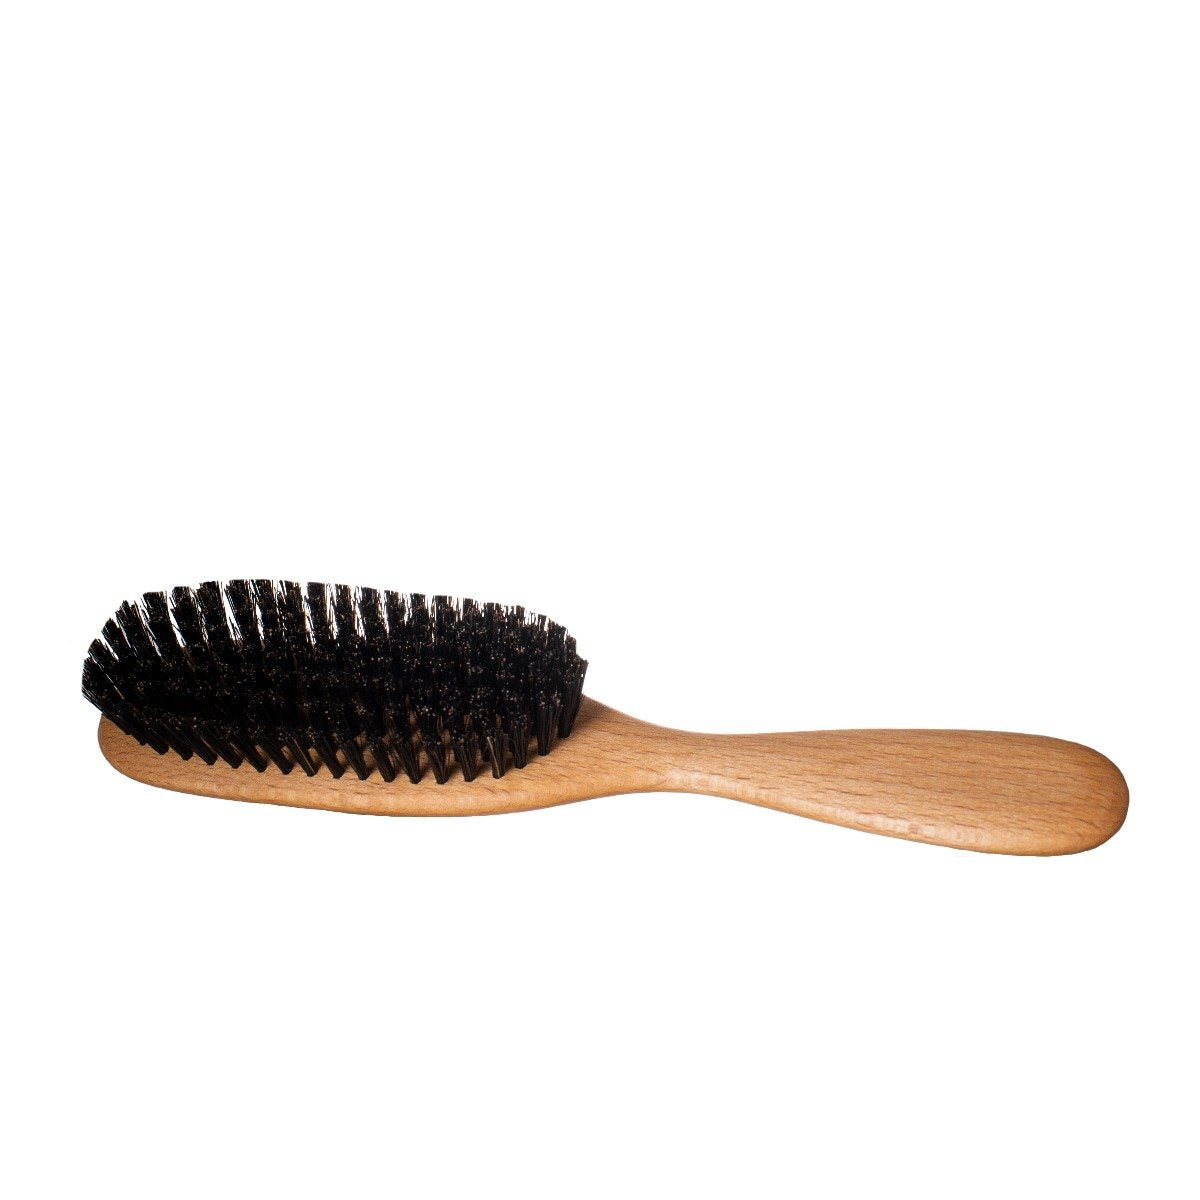 Buy GranNaturals Boar Bristle Paddle Hair Brush Wooden Handle for All Hair  Types Online at Low Prices in India  Amazonin